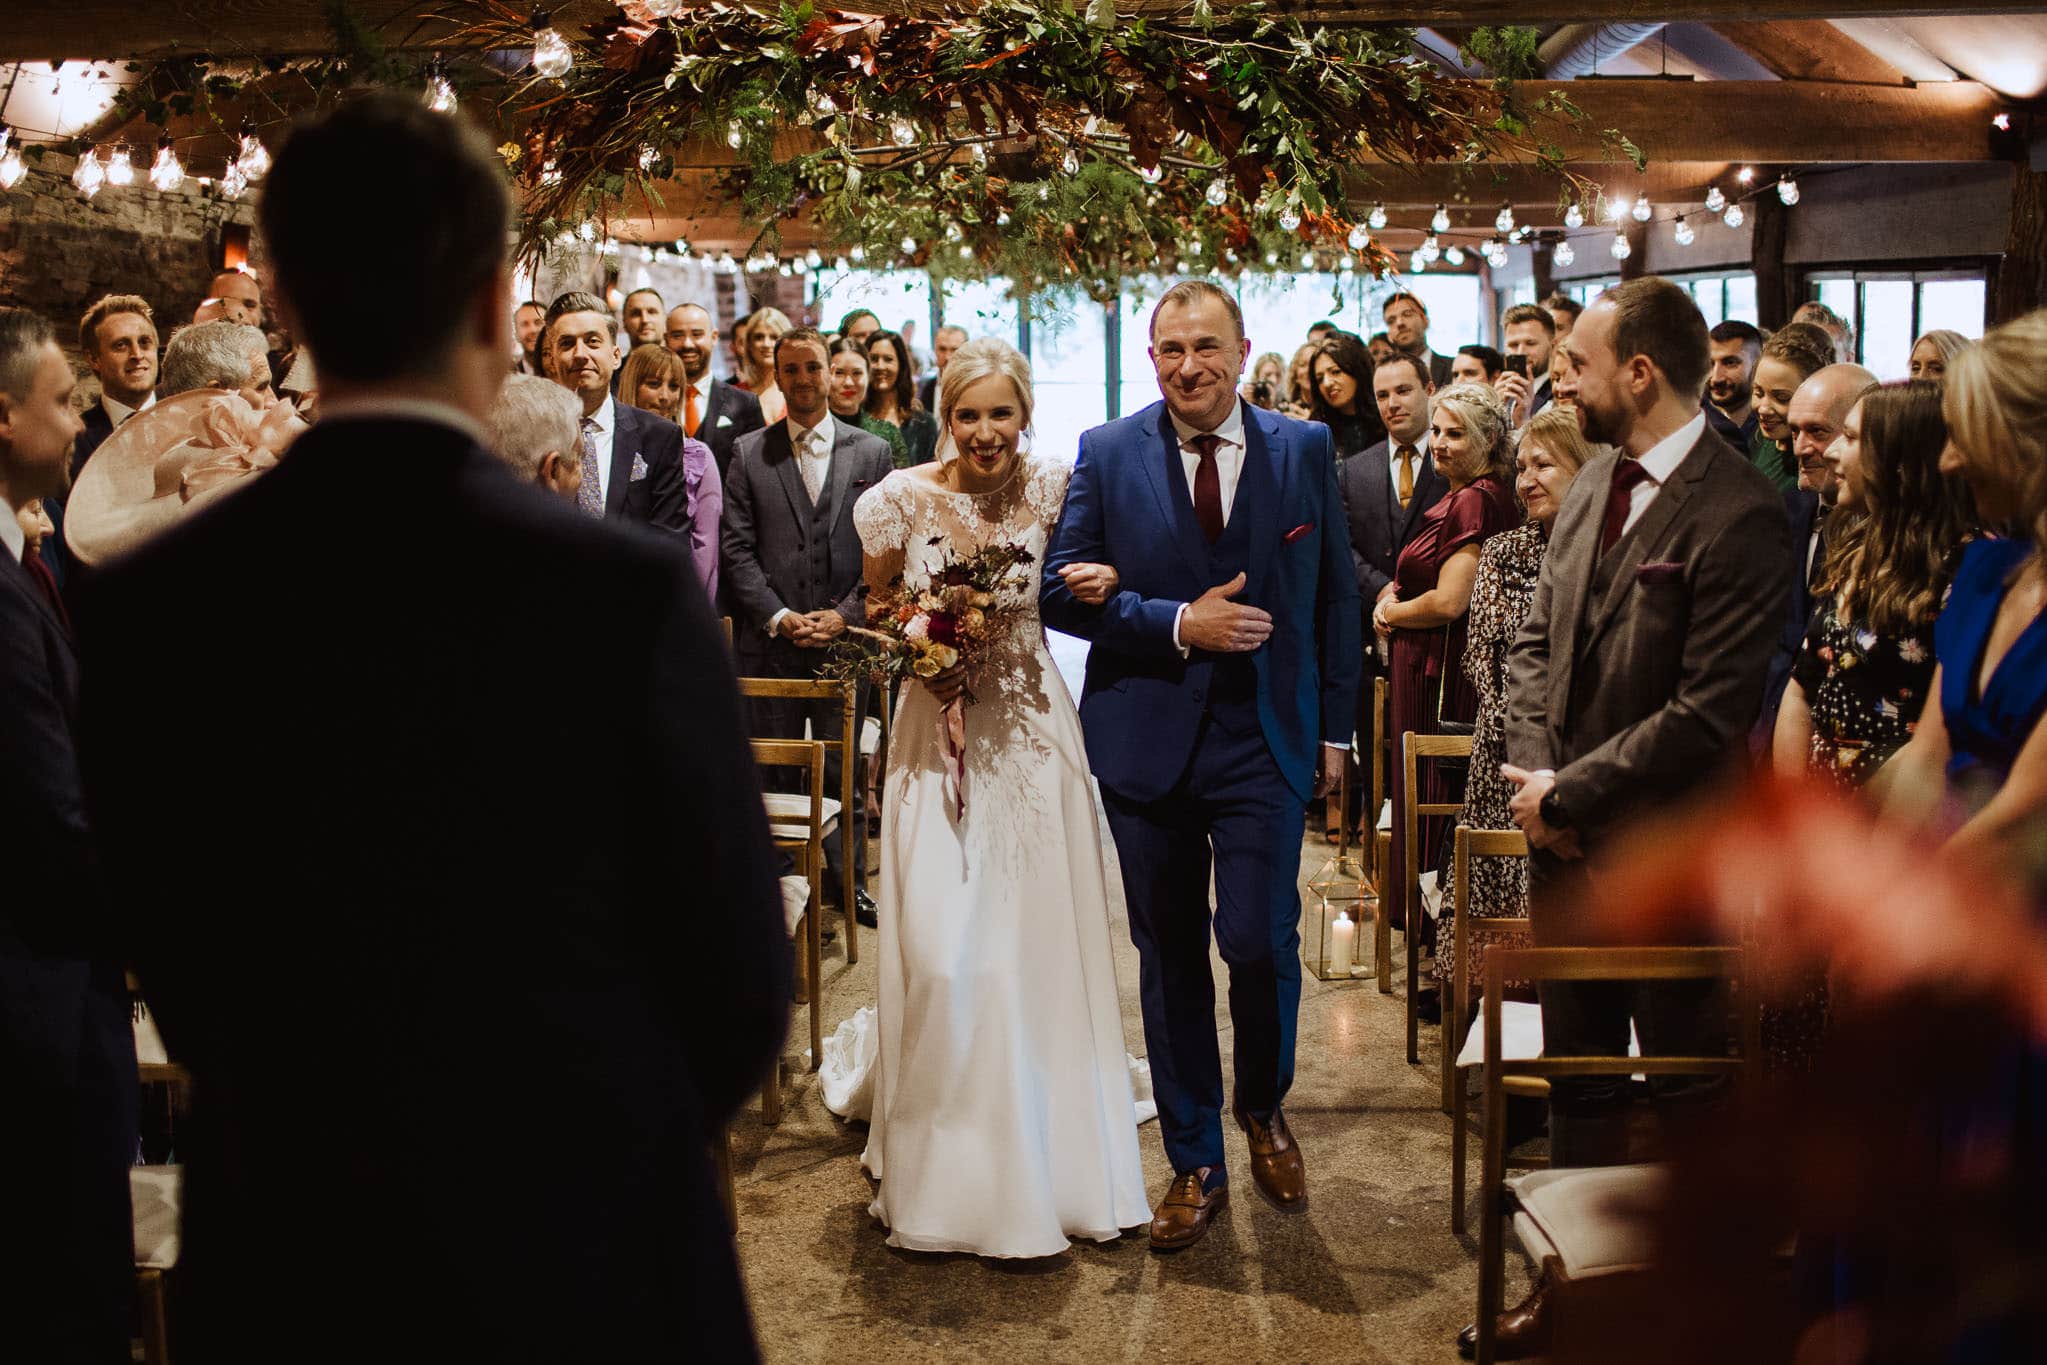 bride's entrance to ceremony in the barn at Dewsall Court